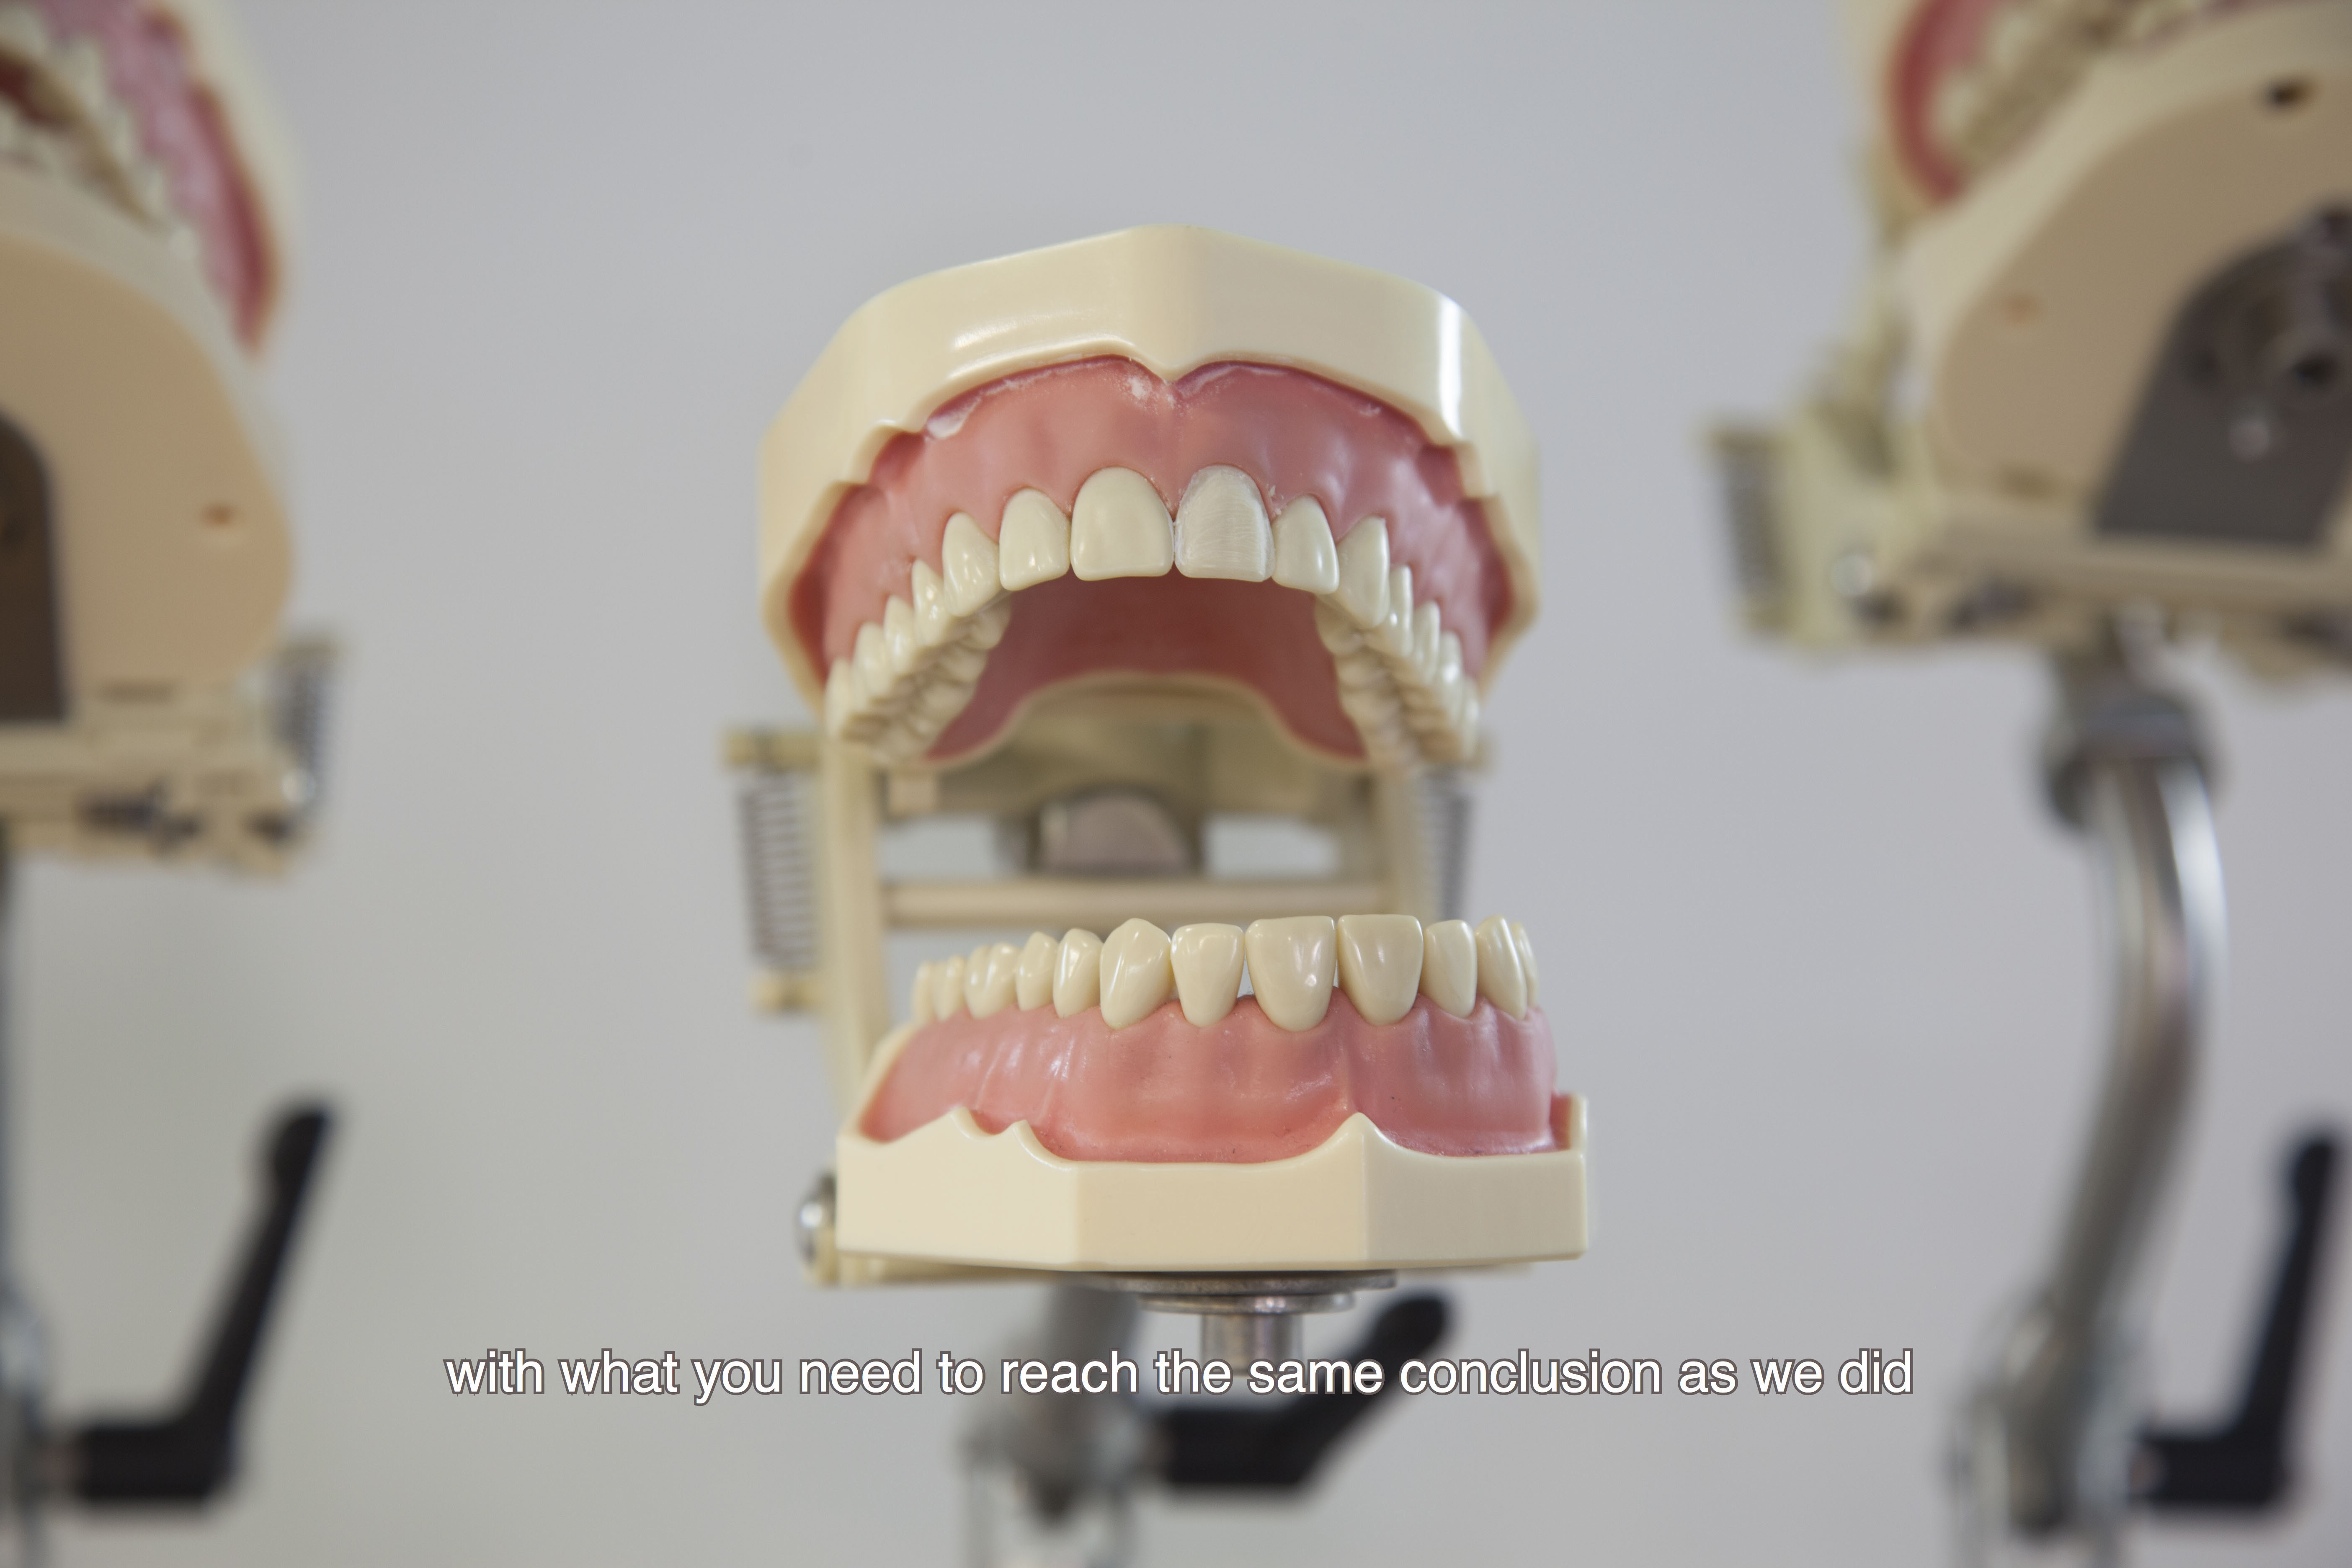 A still shot from the video A Problem, where three dental set jaws give a speech about a problem